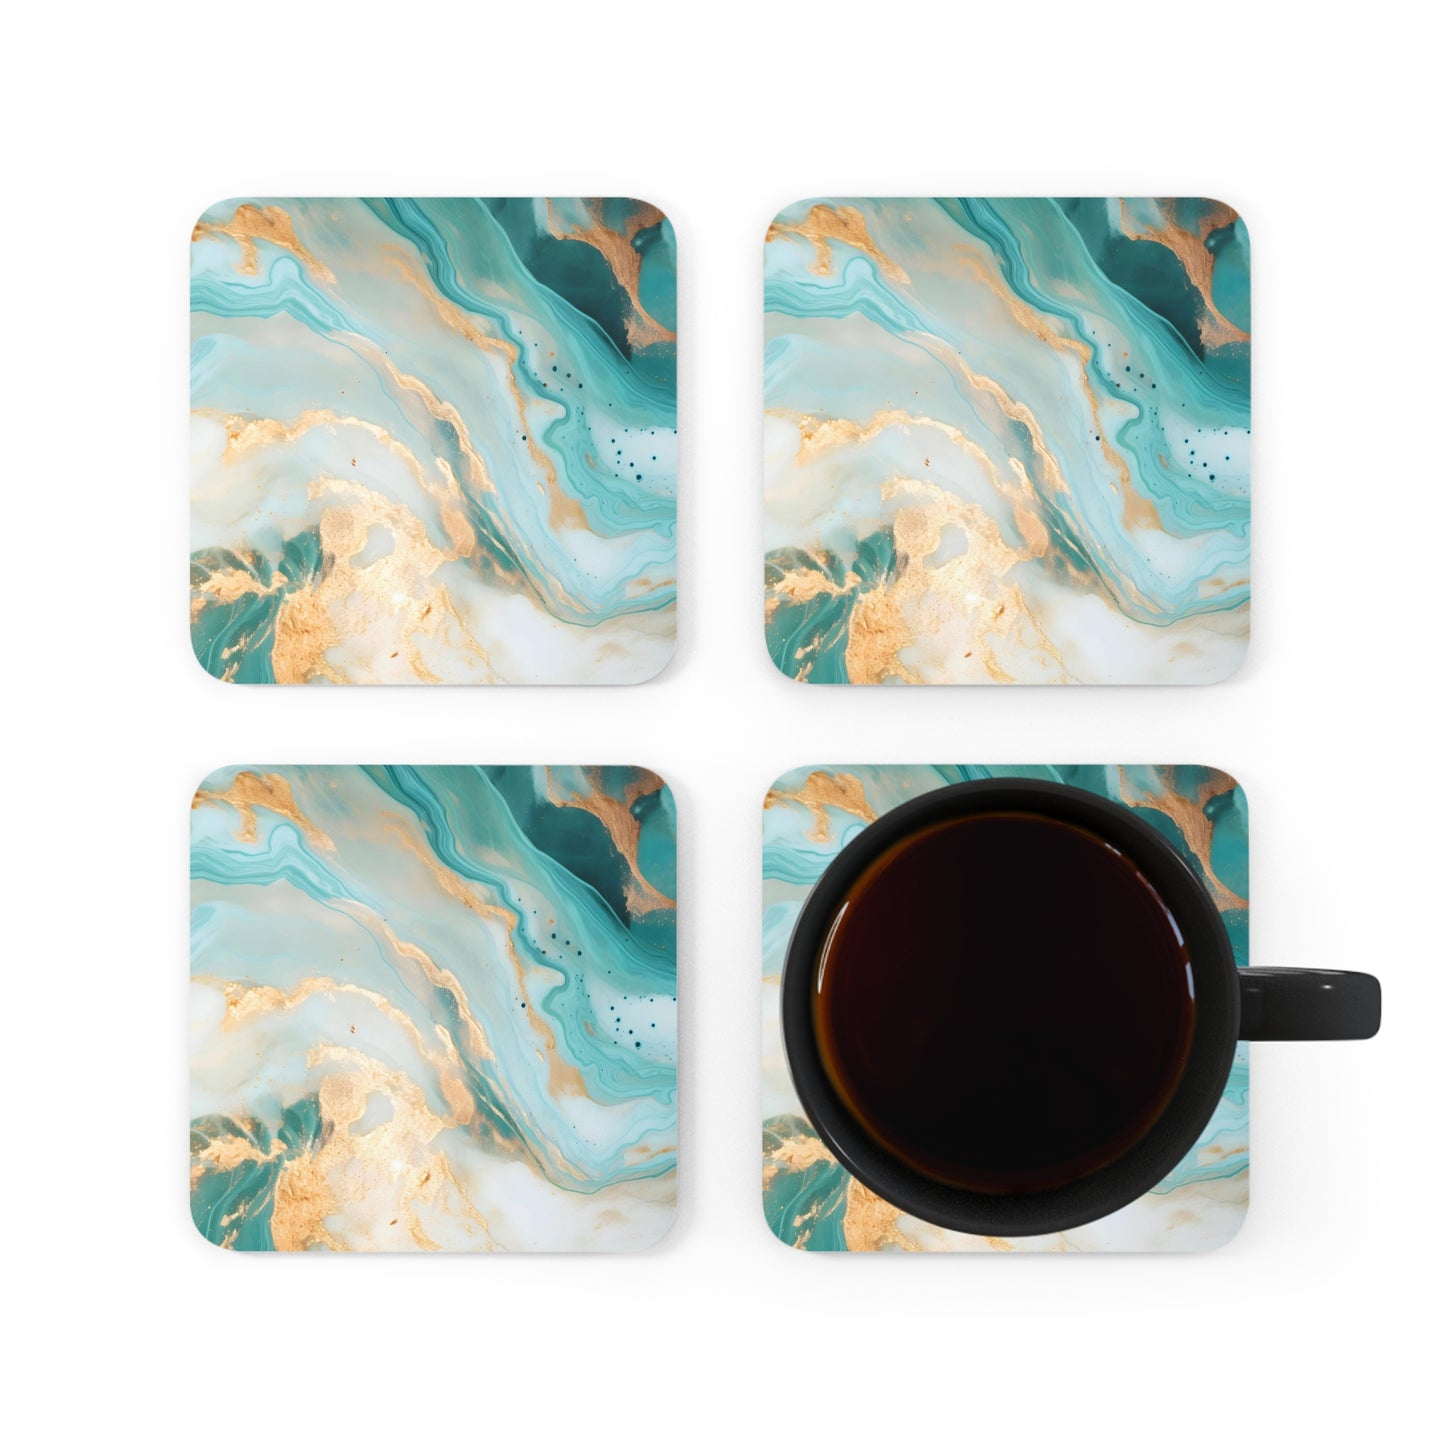 Soft Teal, Turquoise and Ivory Geode | Set of 4 Coasters